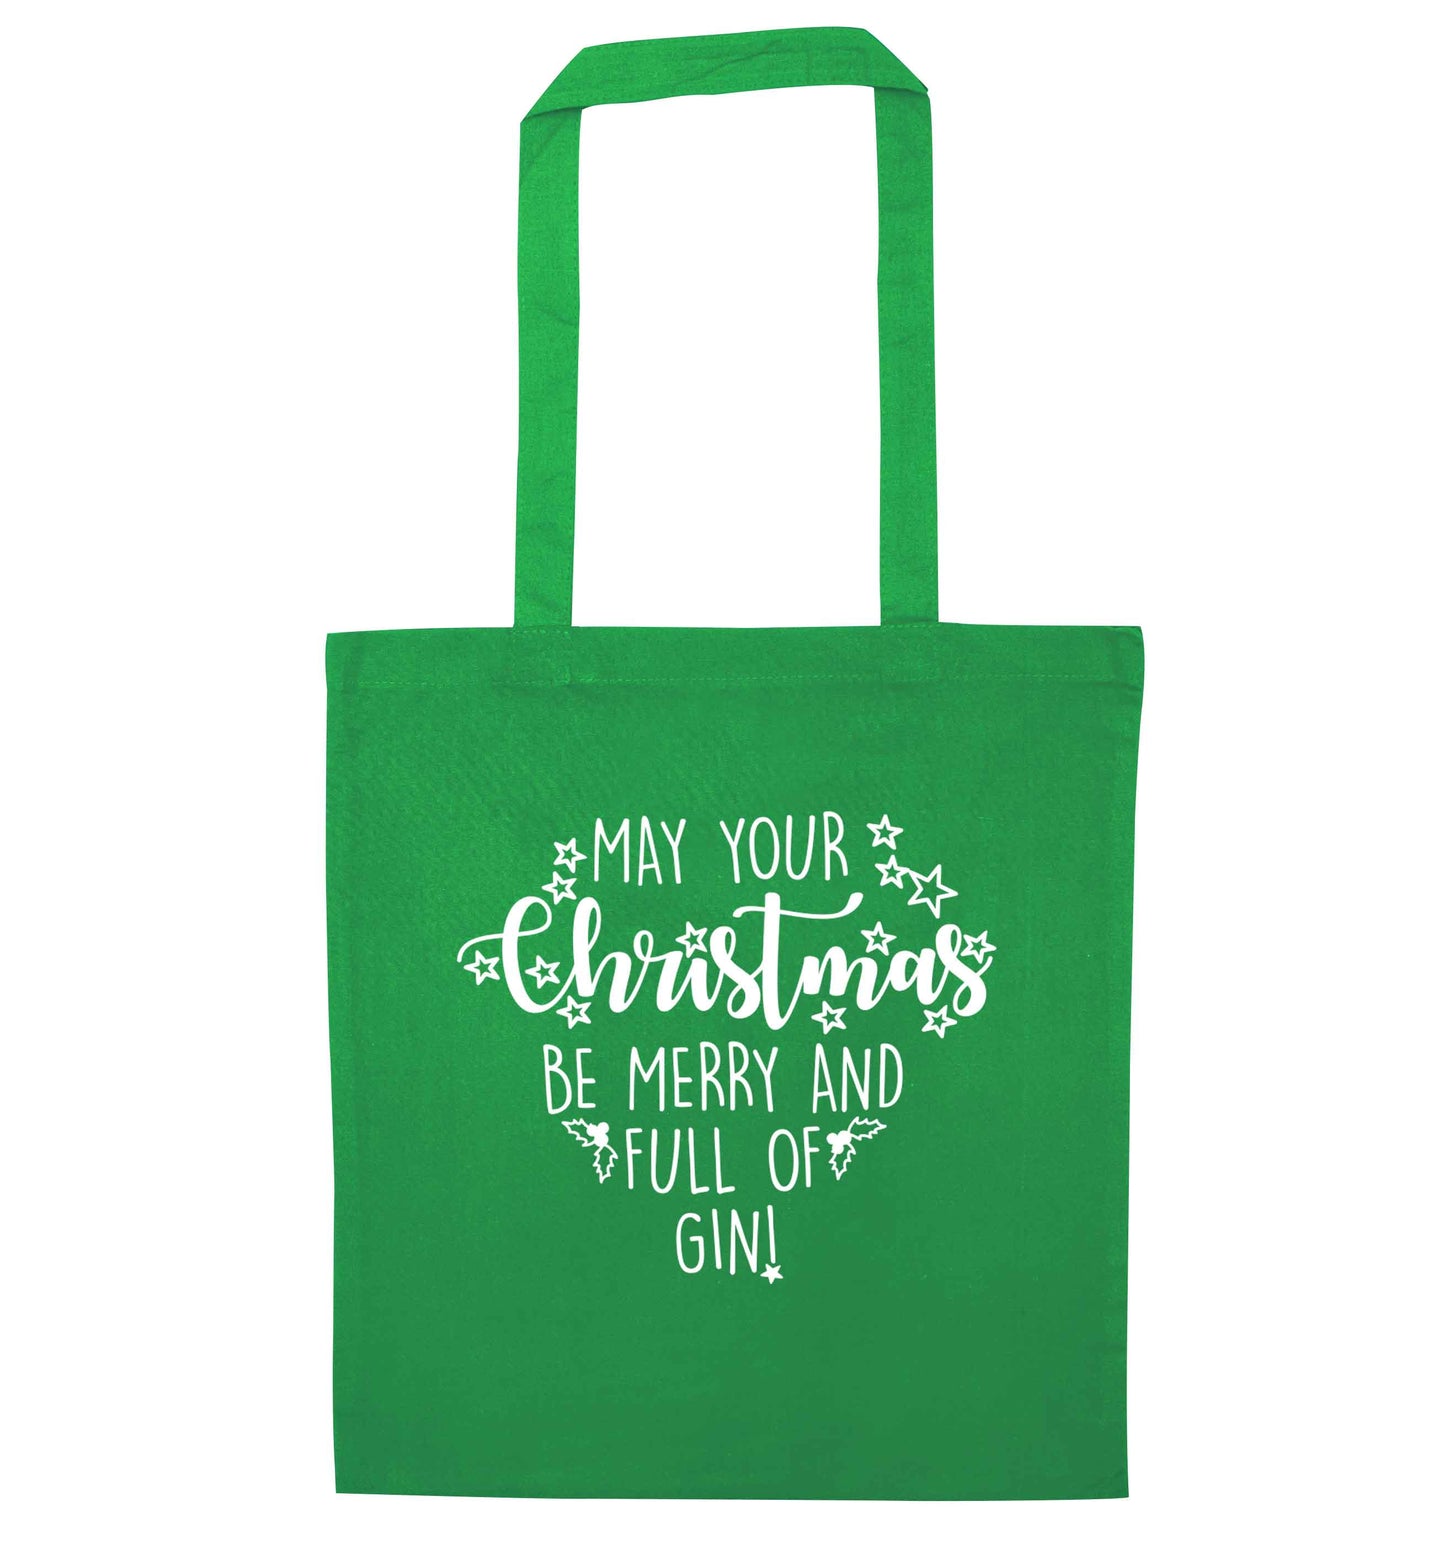 May your Christmas be merry and full of gin green tote bag